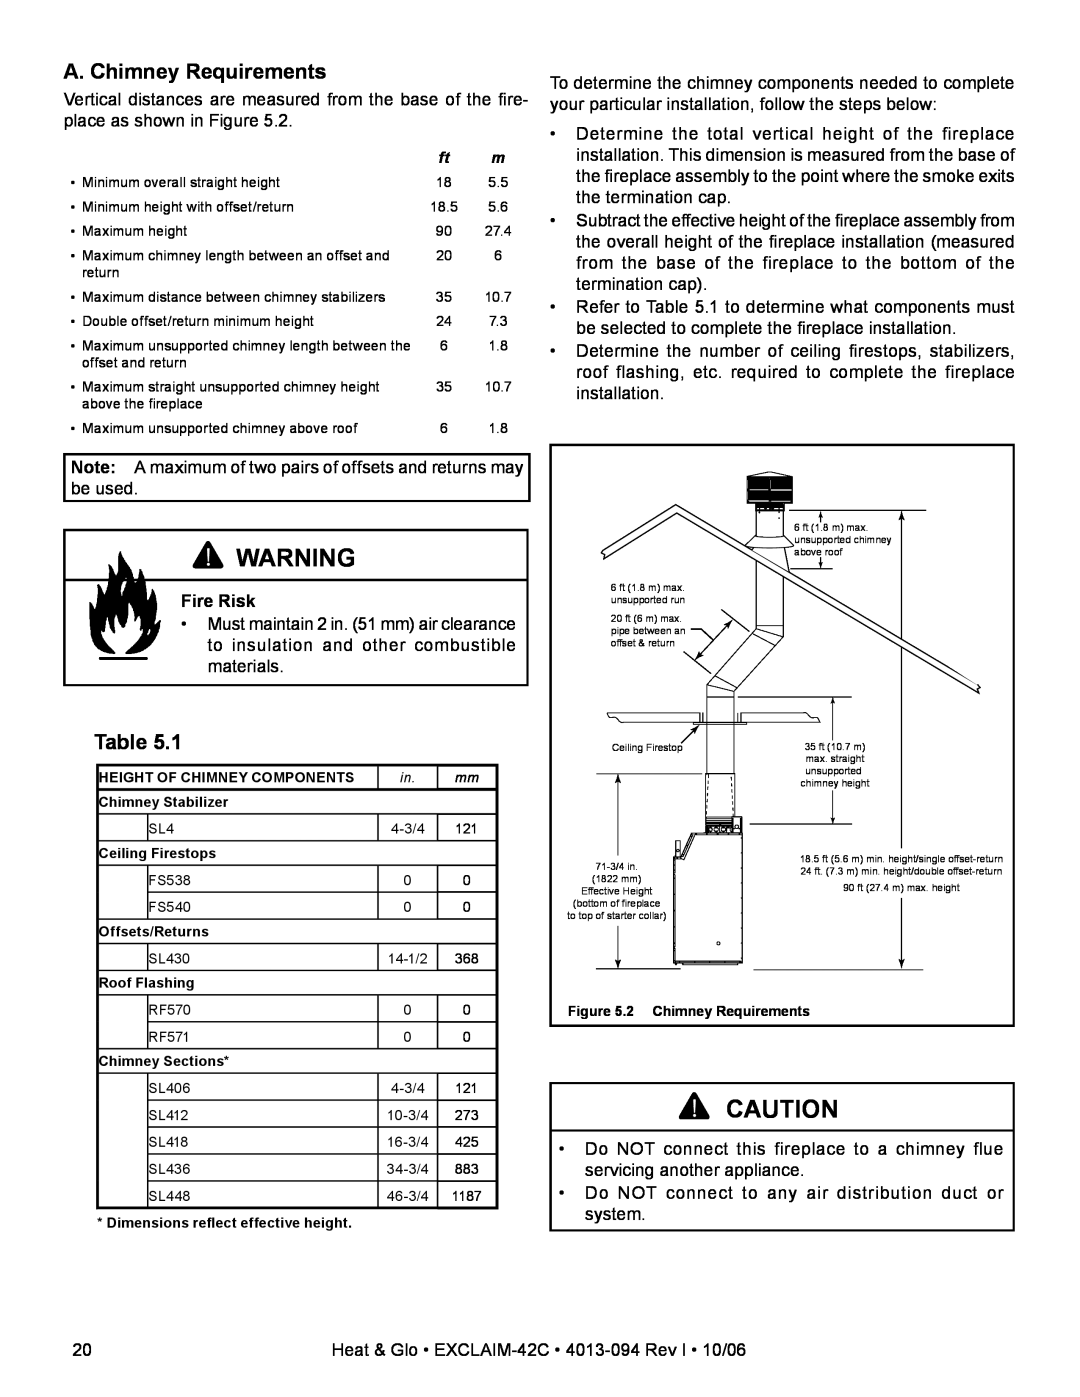 Heat & Glo LifeStyle EXCLAIM-42H-C, EXCLAIM-42T-C owner manual A. Chimney Requirements, Fire Risk 